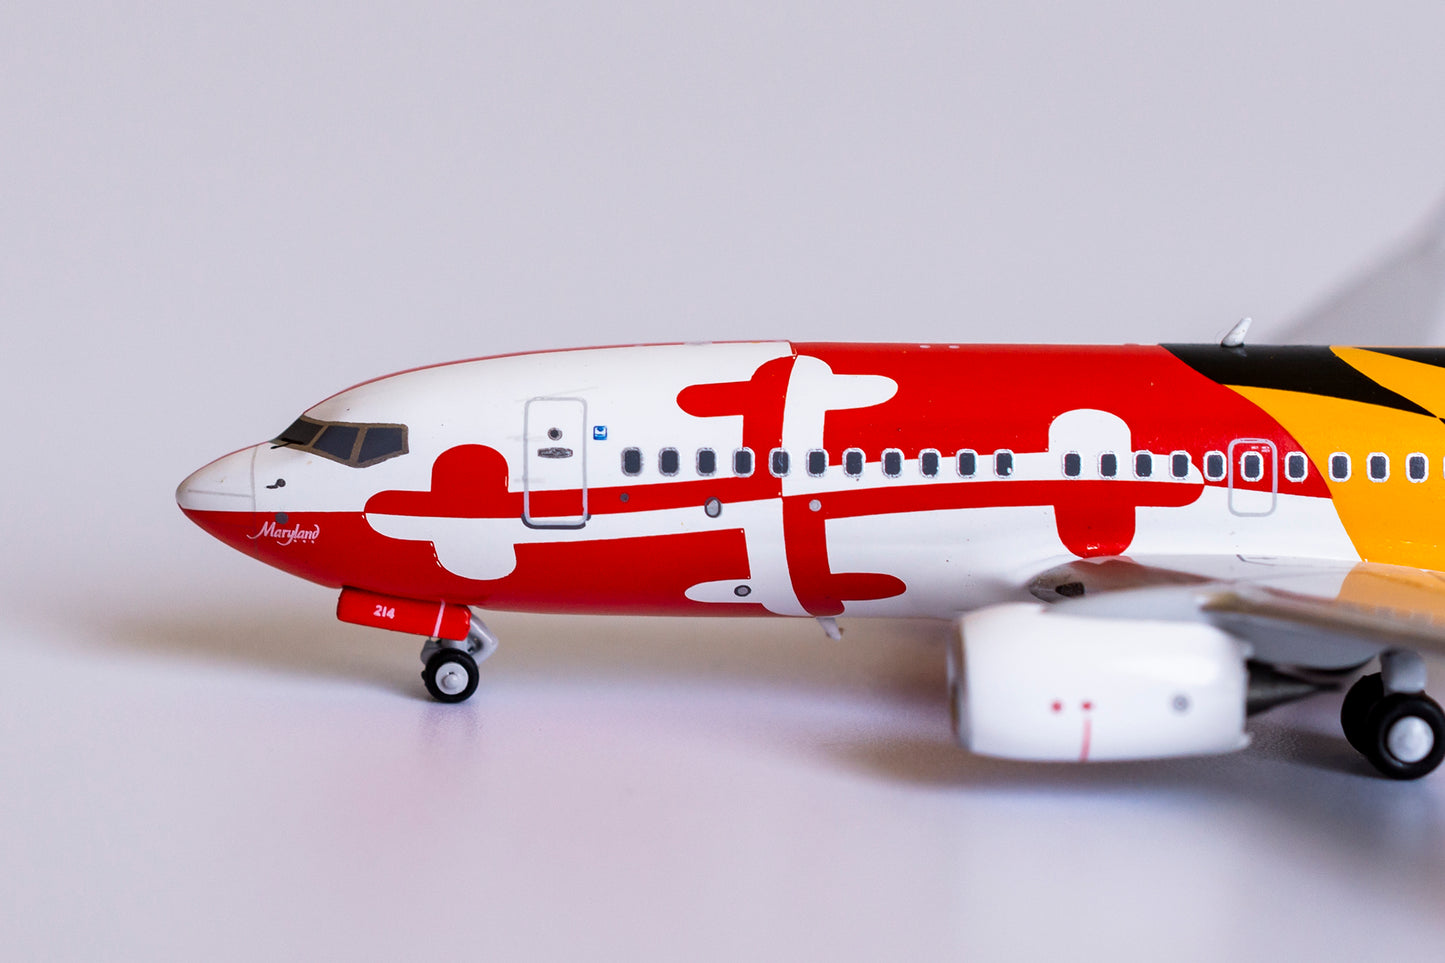 1:400 NG Models Southwest Airlines Boeing 737-700 "Maryland One" N214WN (Canyon Blue Tail) NG77006